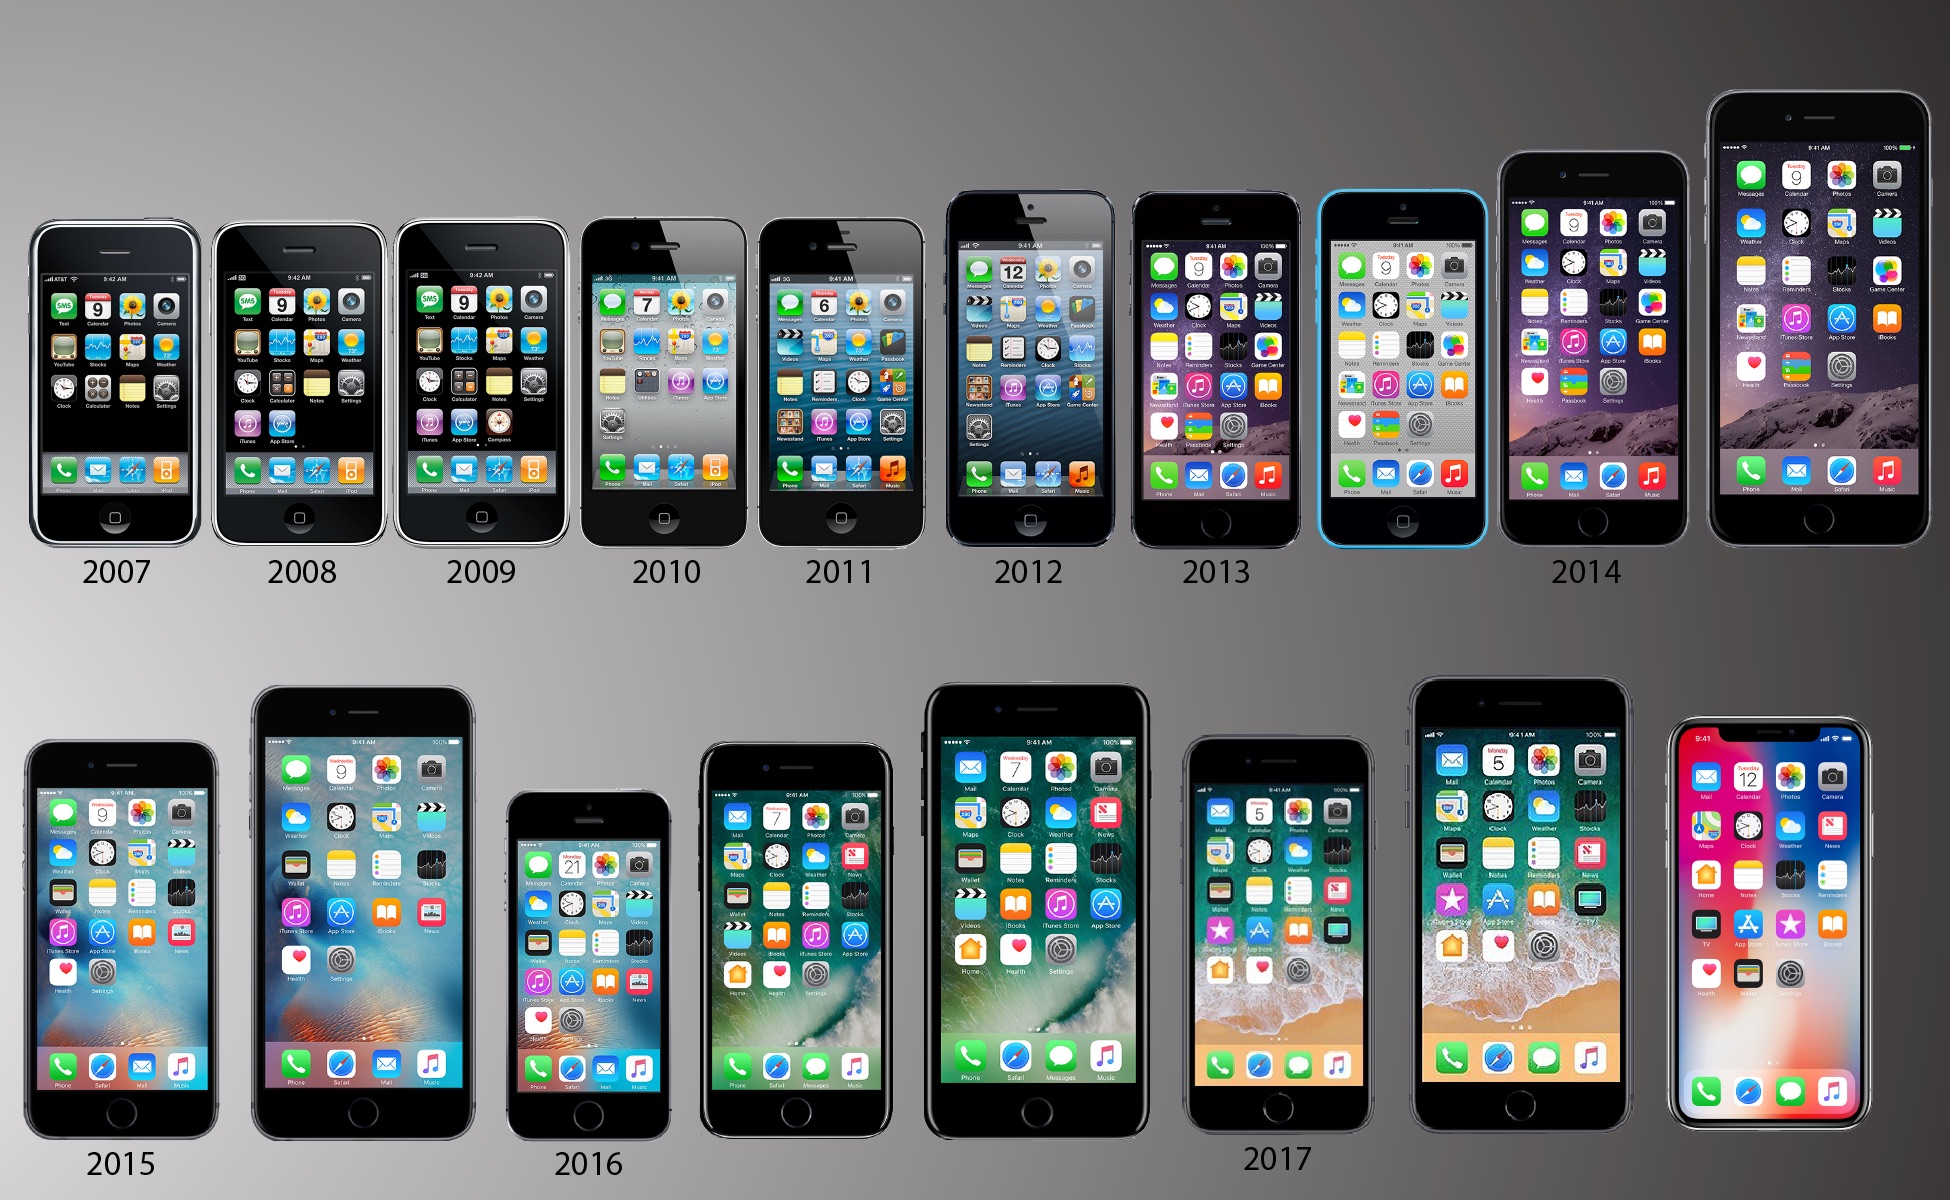 apple iphone models by year